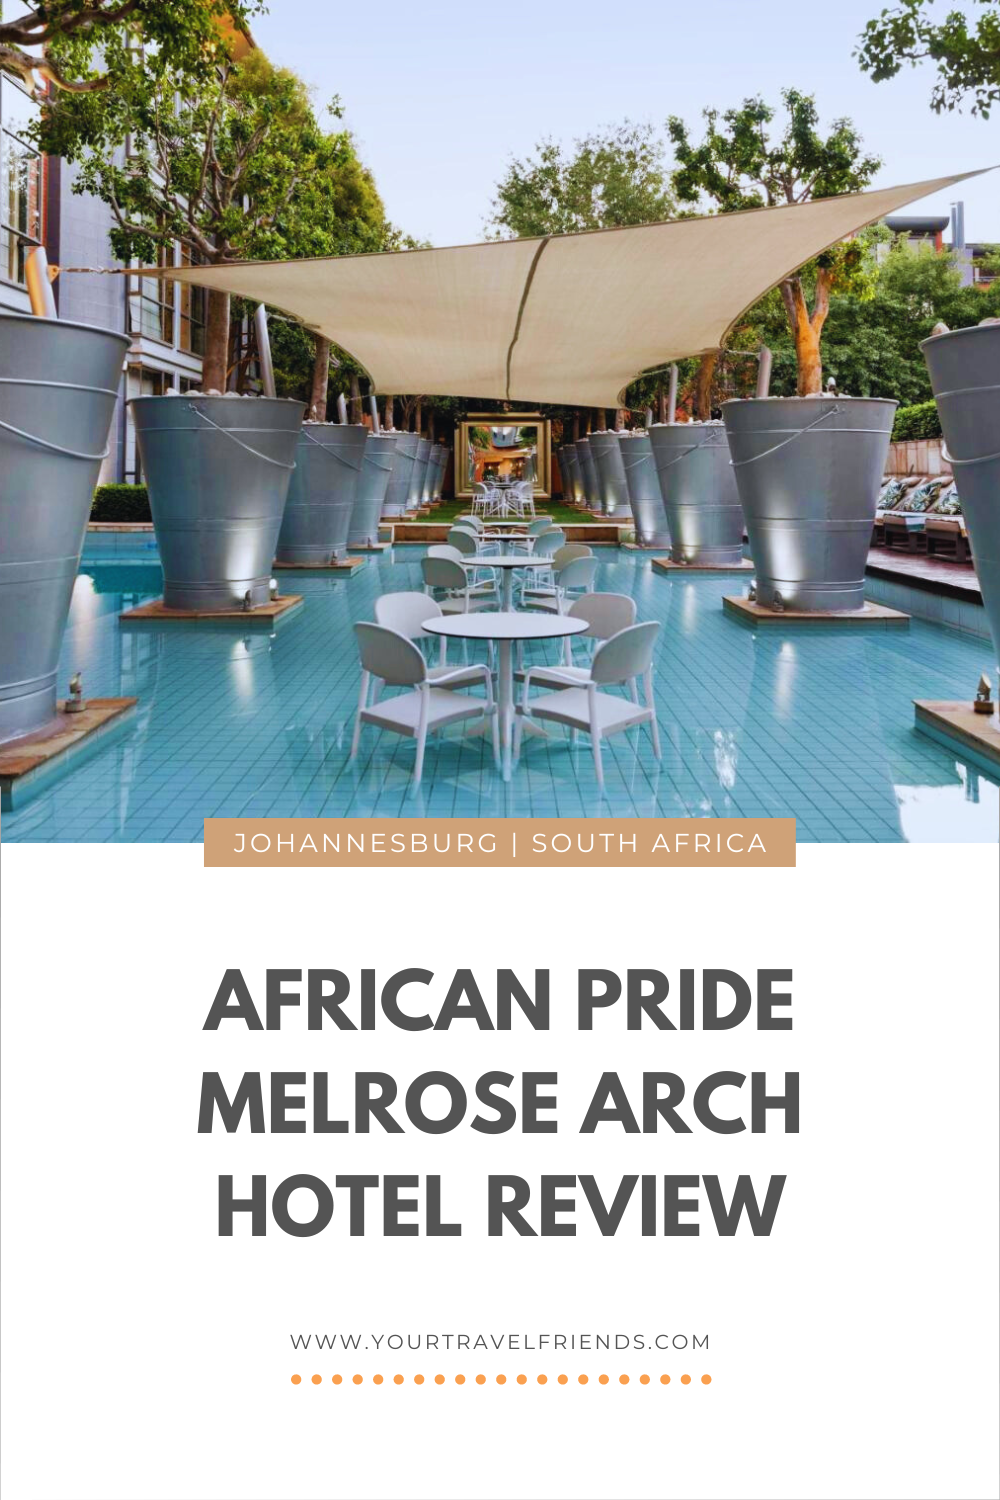 AFRICAN PRIDE MELROSE ARCH HOTEL REVIEW